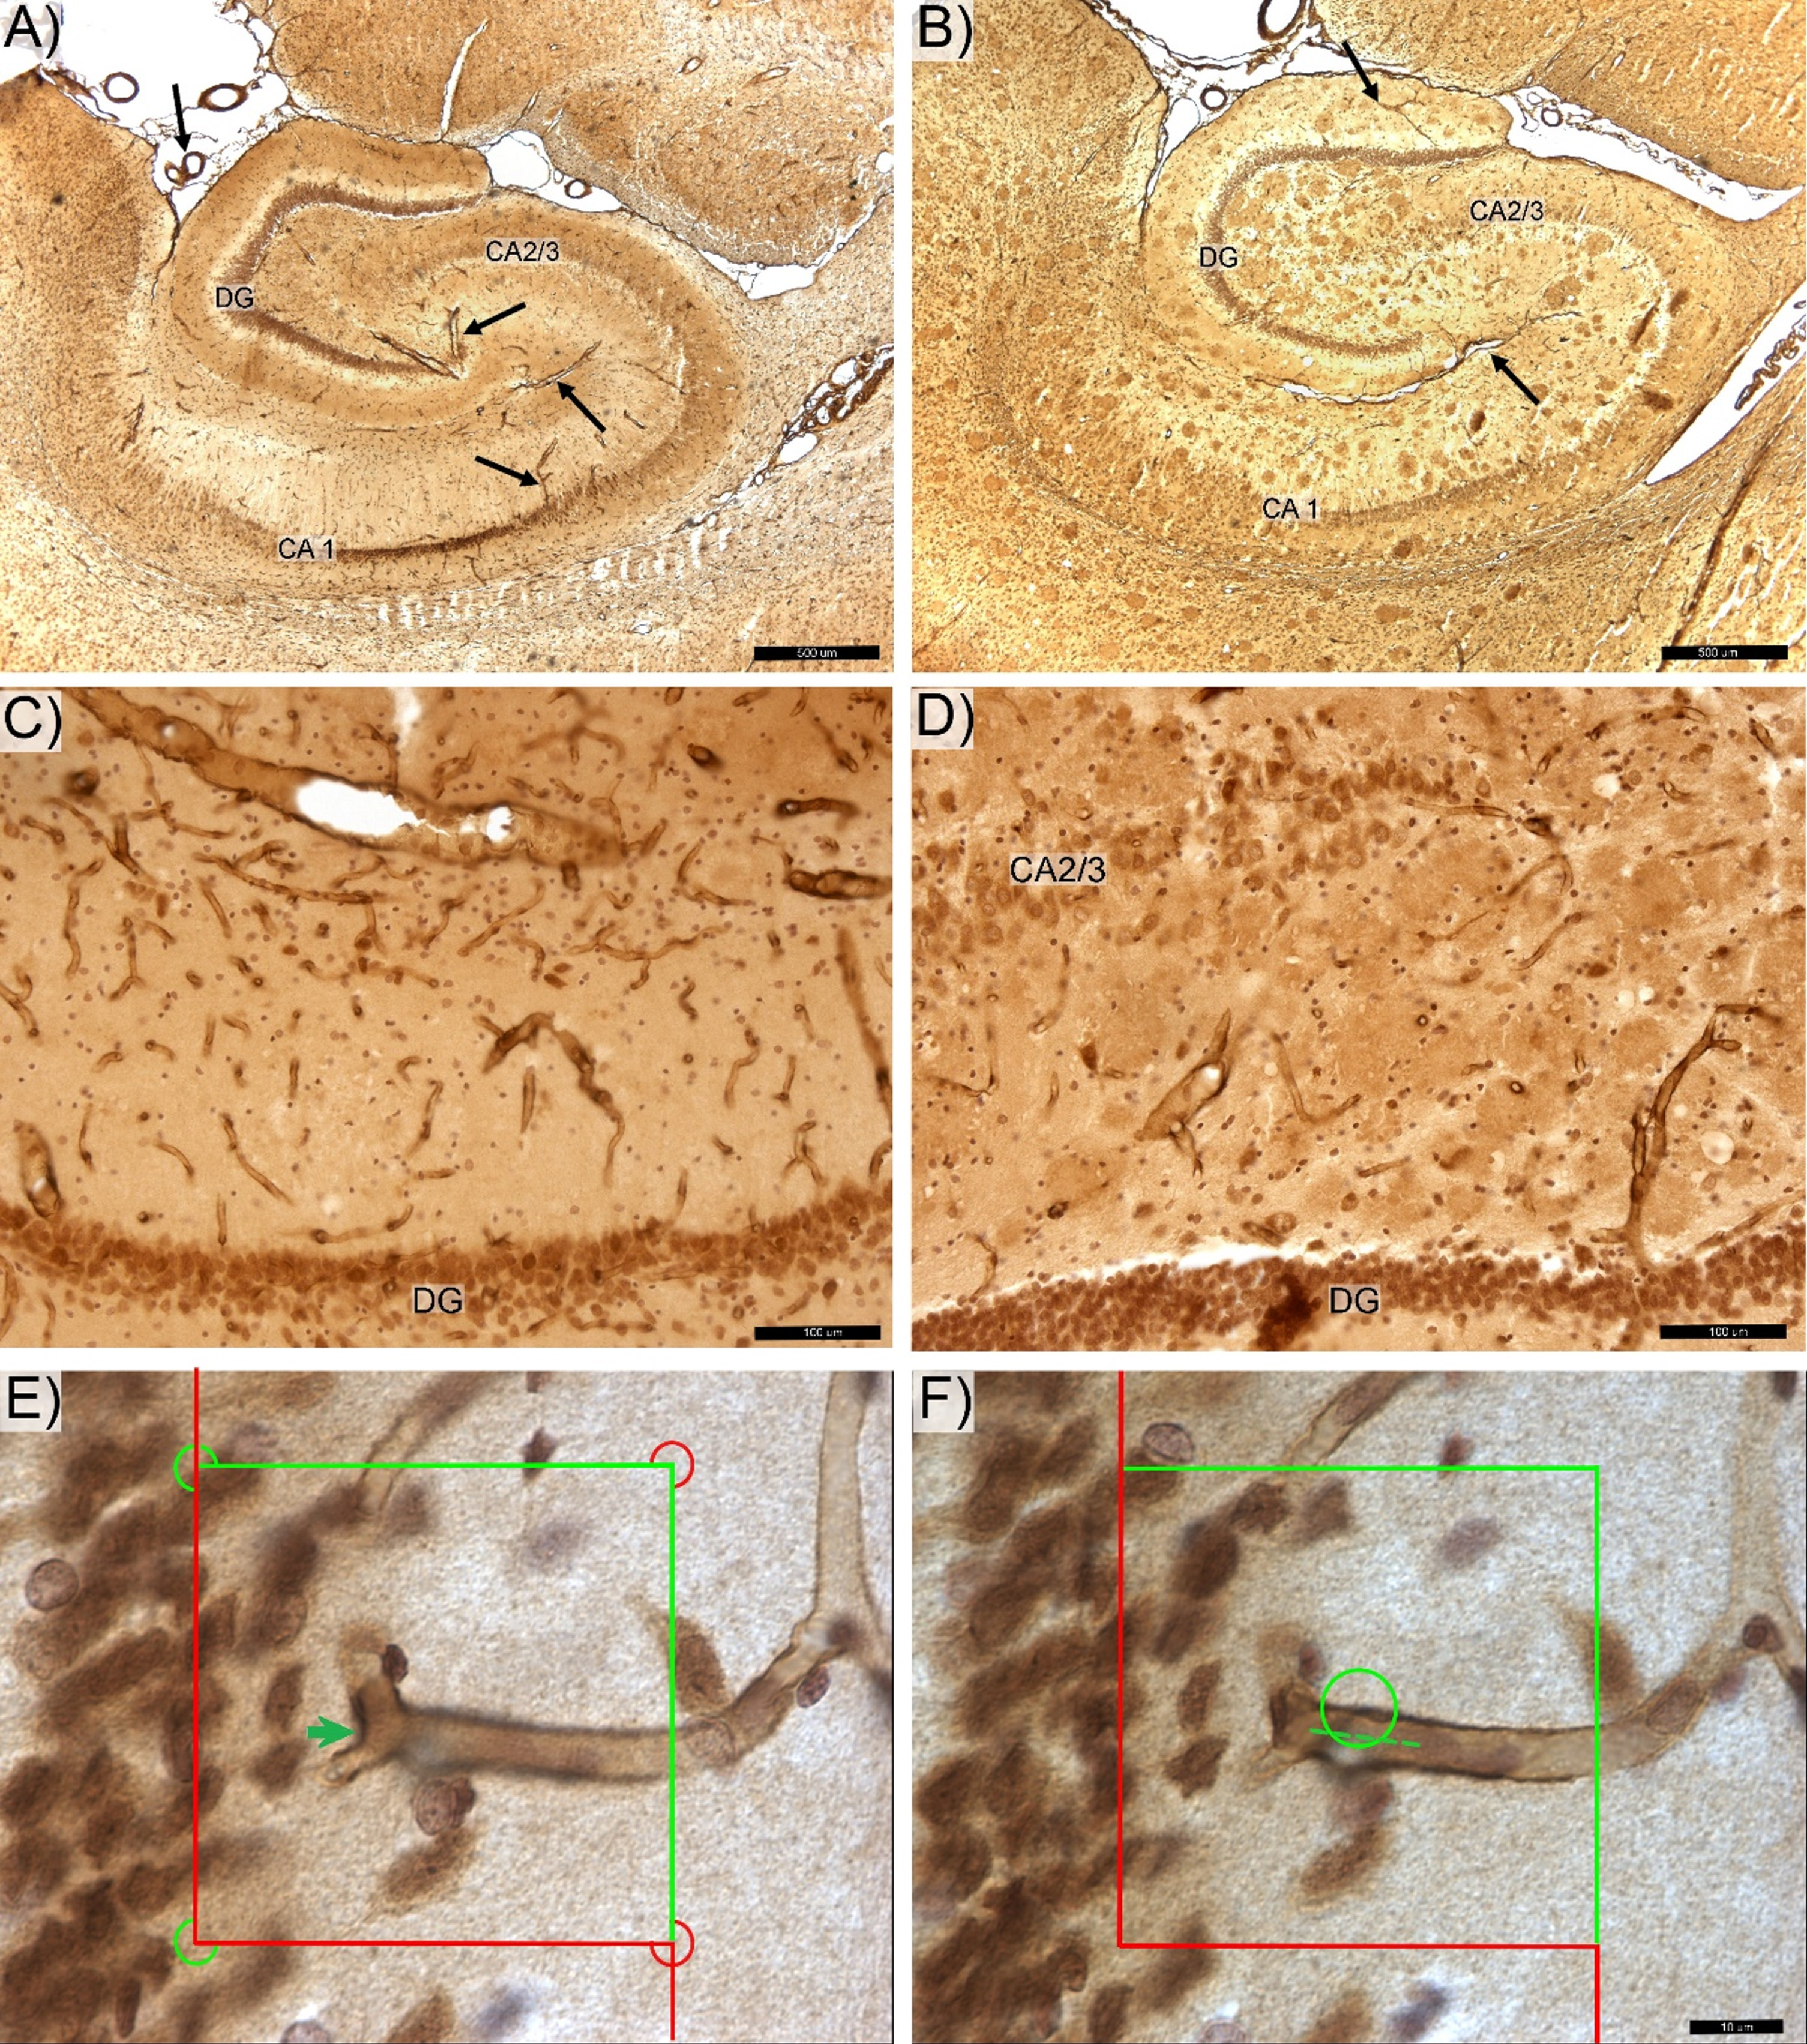 Photomicrograph of the anti-laminin antibody labeled hippocampal microvessels in control (A,C) and transgenic (B,D) rats. DG -, CA 2/3-, and CA1-labeled respective zone of the pyramidal cells layer. The magisterial vessels, serve as the main source of hippocampal blood supply (black arrows). E) Total number of capillary segments (Euler number) was quantified by counting “saddle points” (green arrow) using the 3D optical disector probe. F) Total capillary length was determined using the Space Balls method based on number of intersections between surface of the virtual 3D sphere probe and centerline (spline) of each capillary (dotted line). Space bars: A,B –500 μm; C,D –100 μm; E,F –20 μm.